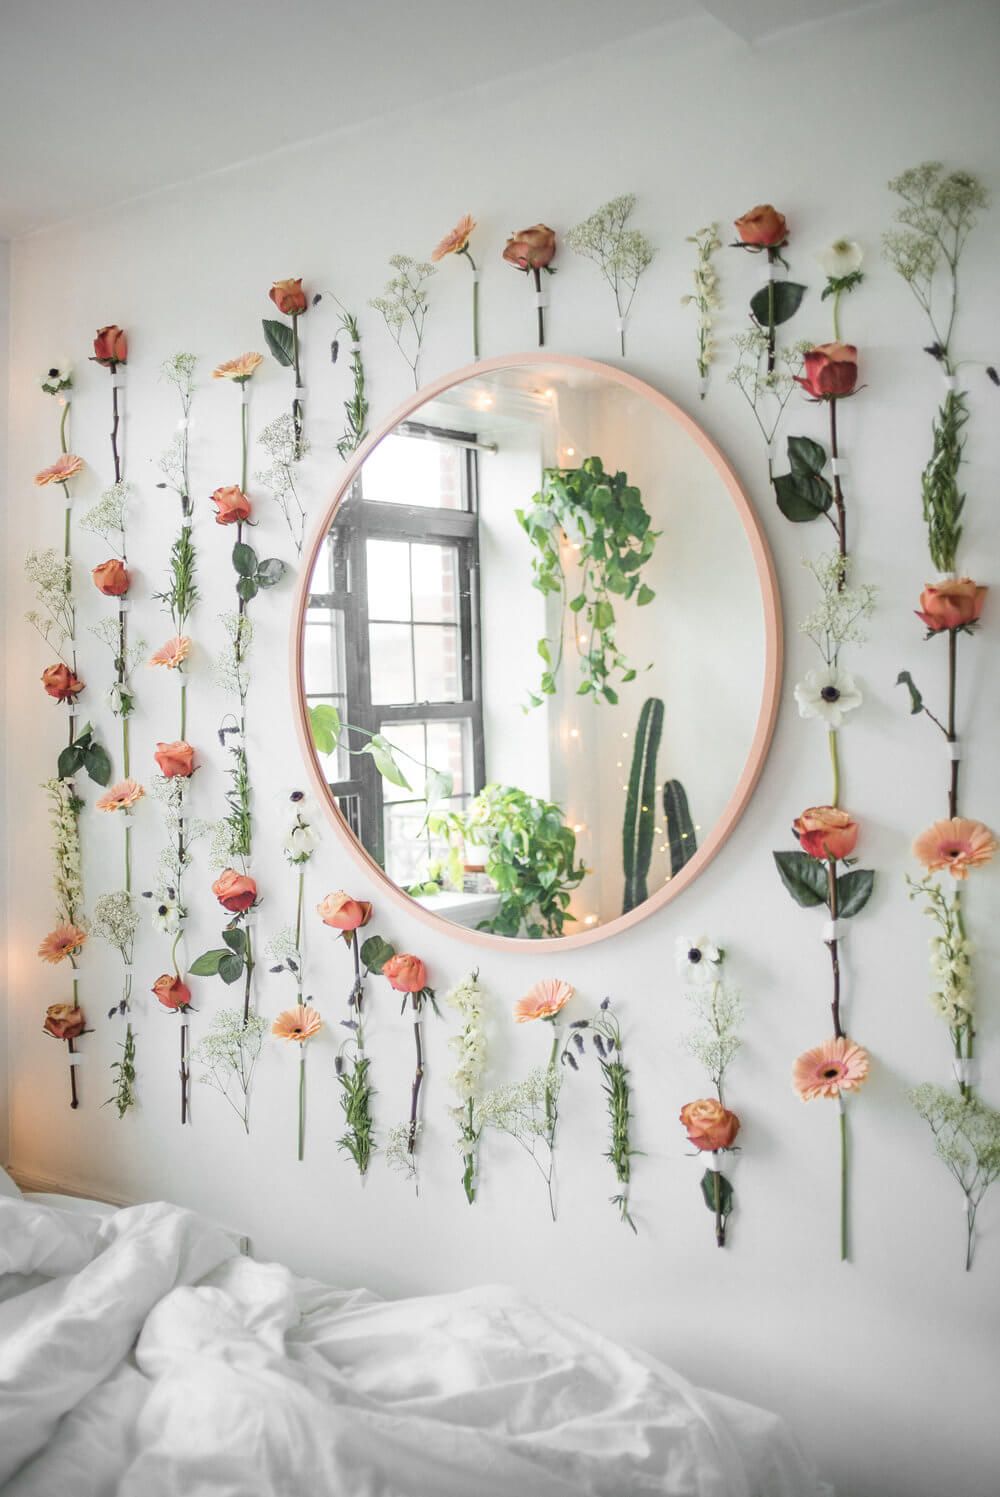 Are there any simple DIY summer garland or hanging decor ideas